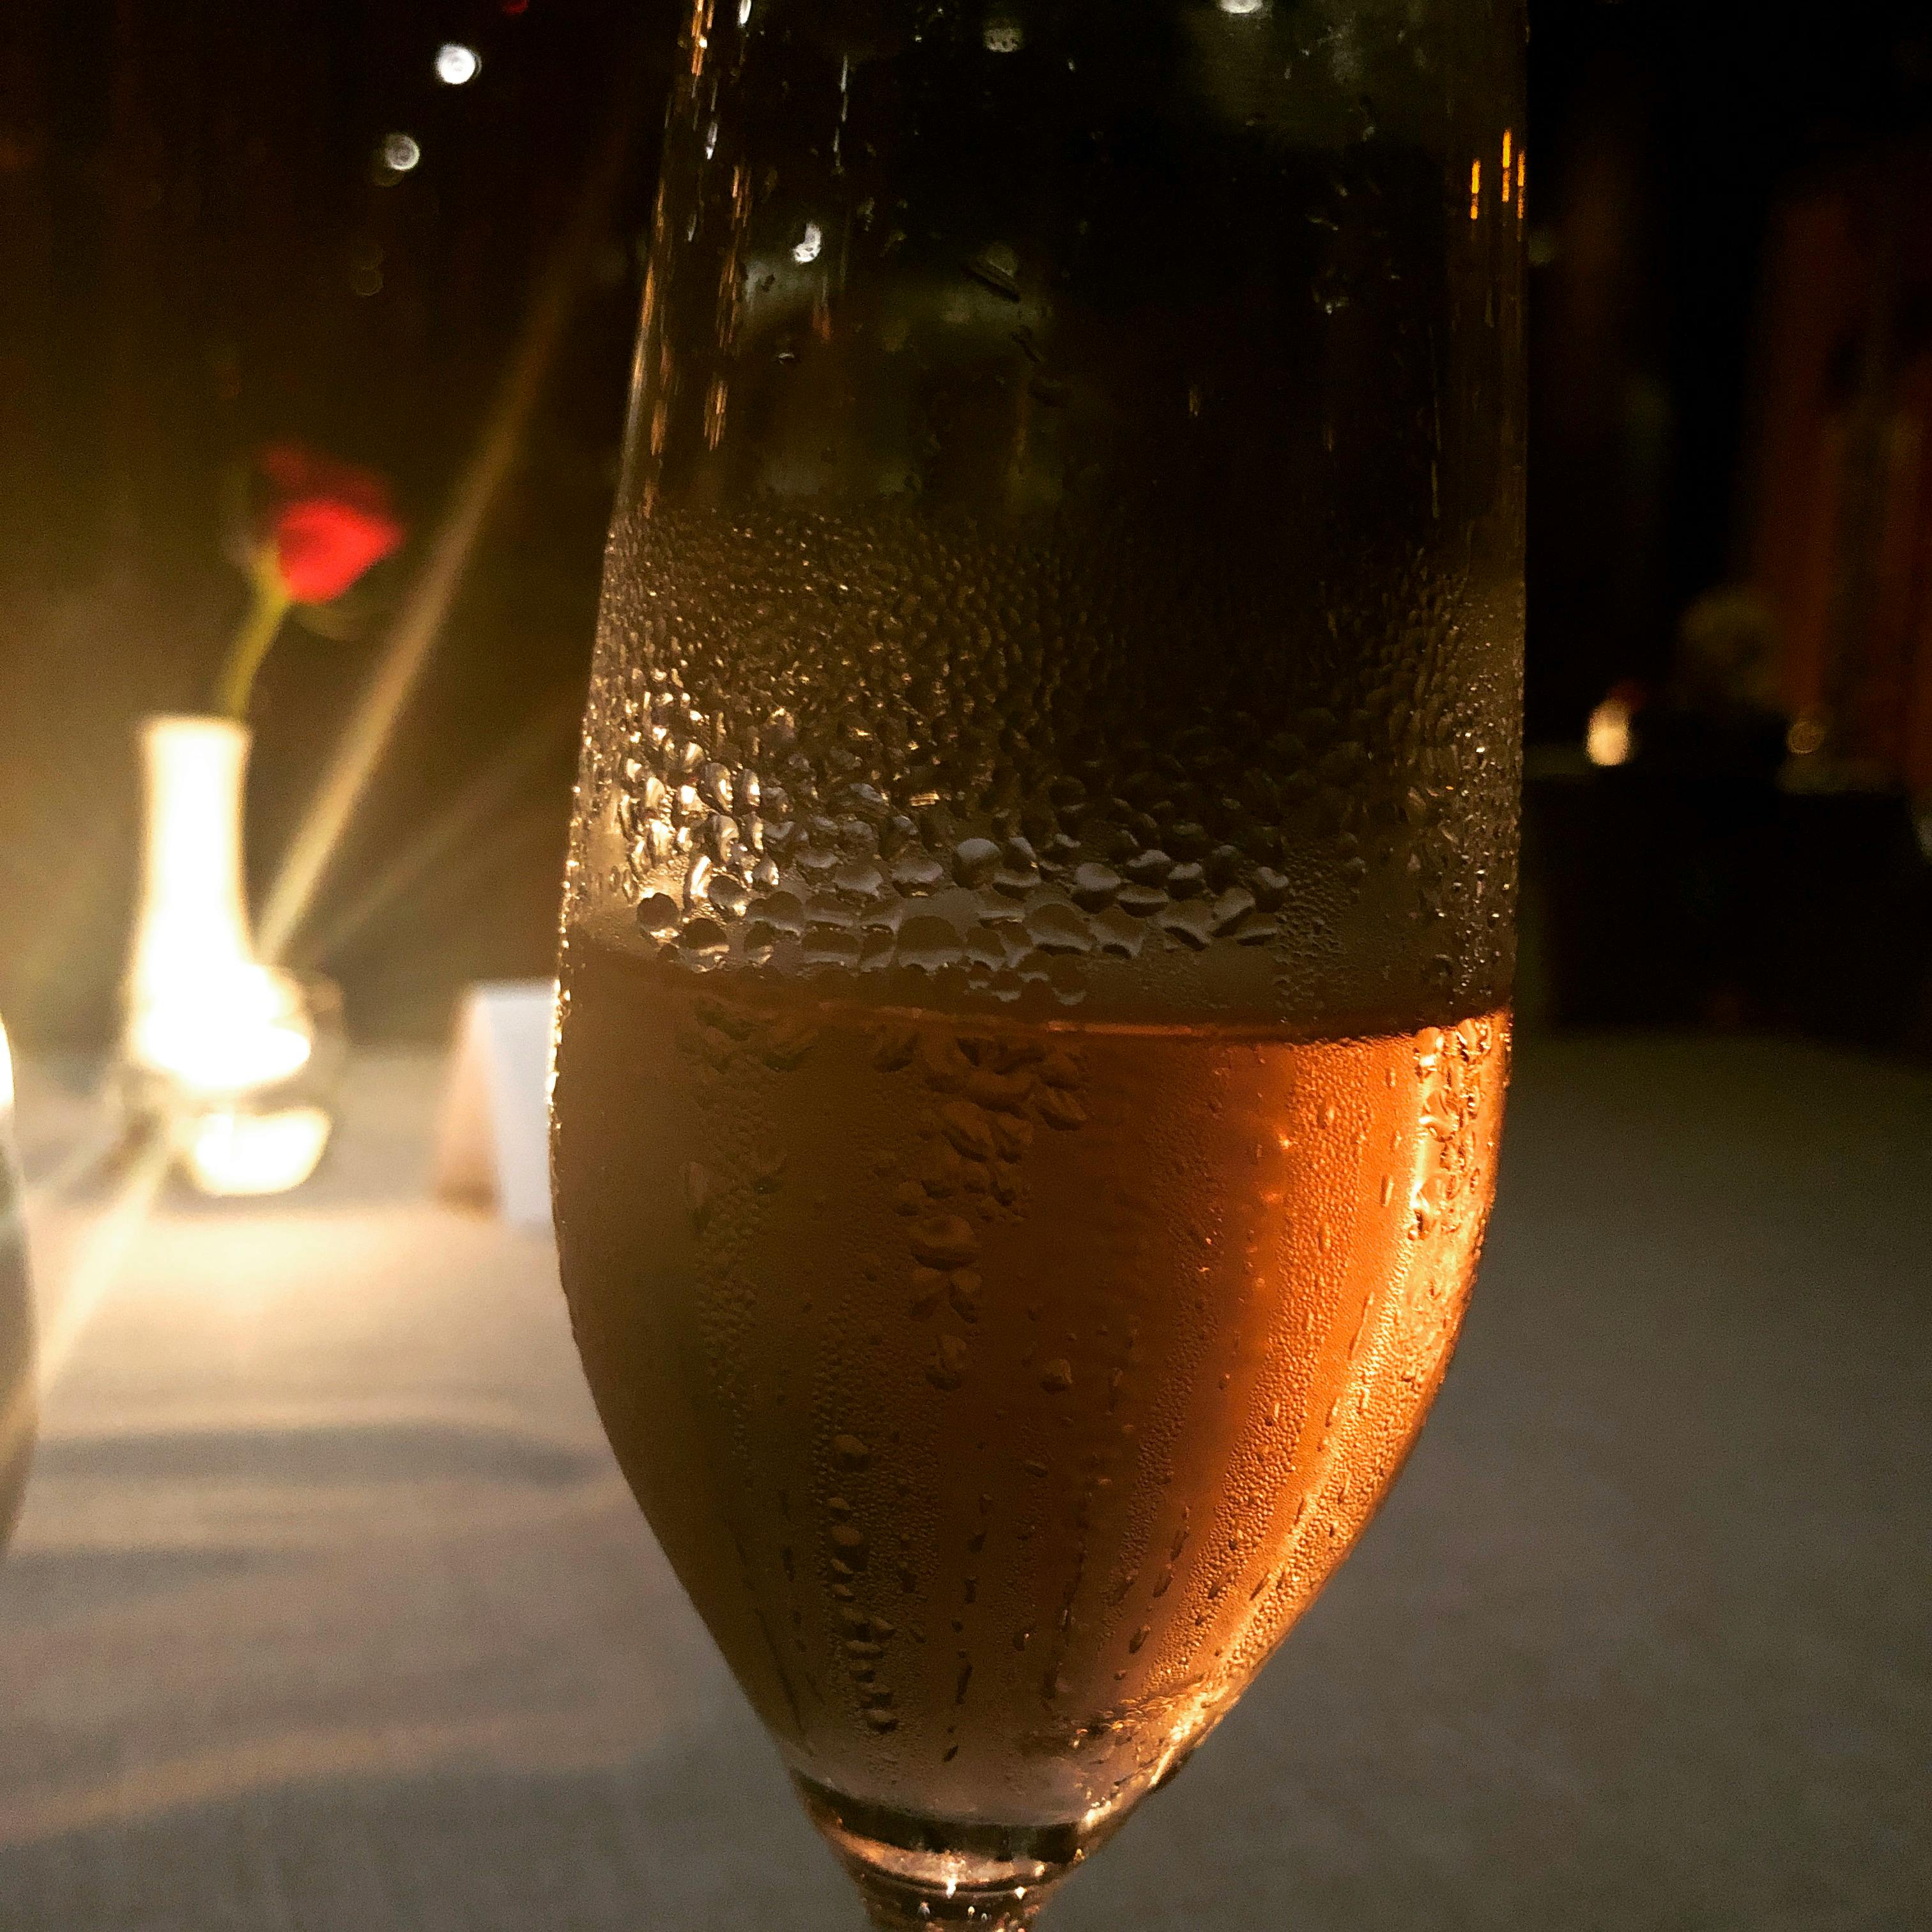 Free stock photo of bubbly, champagne glass, pink